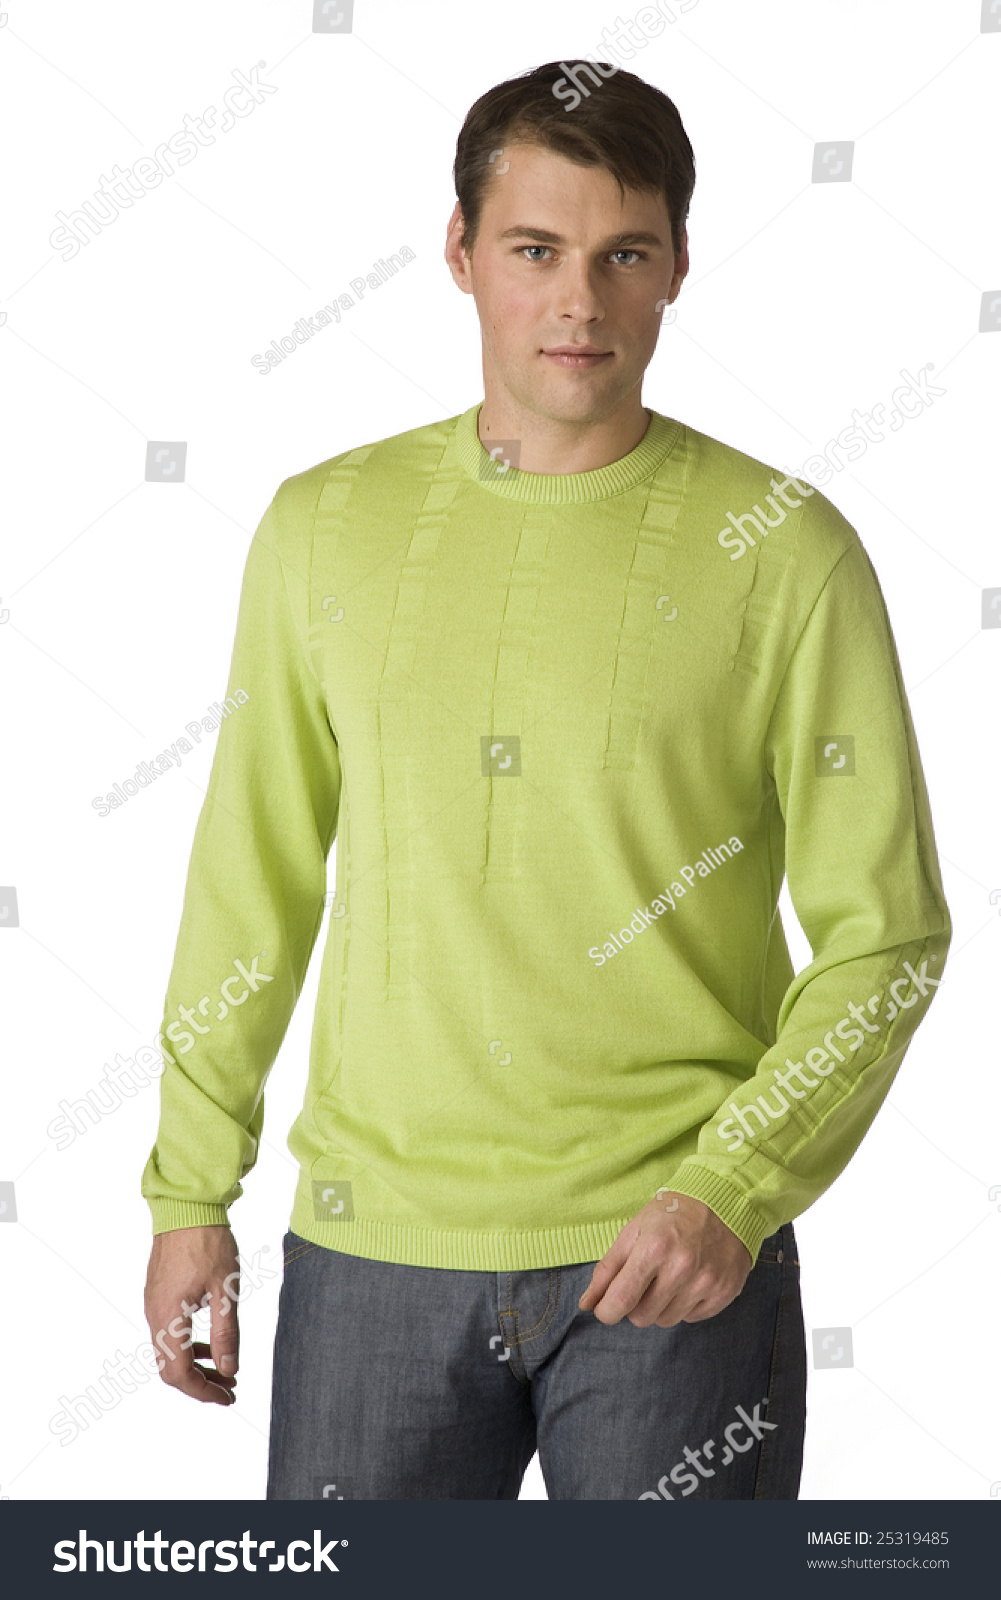 Young Man In A Green Warm Sweater On A White Background Stock Photo ...